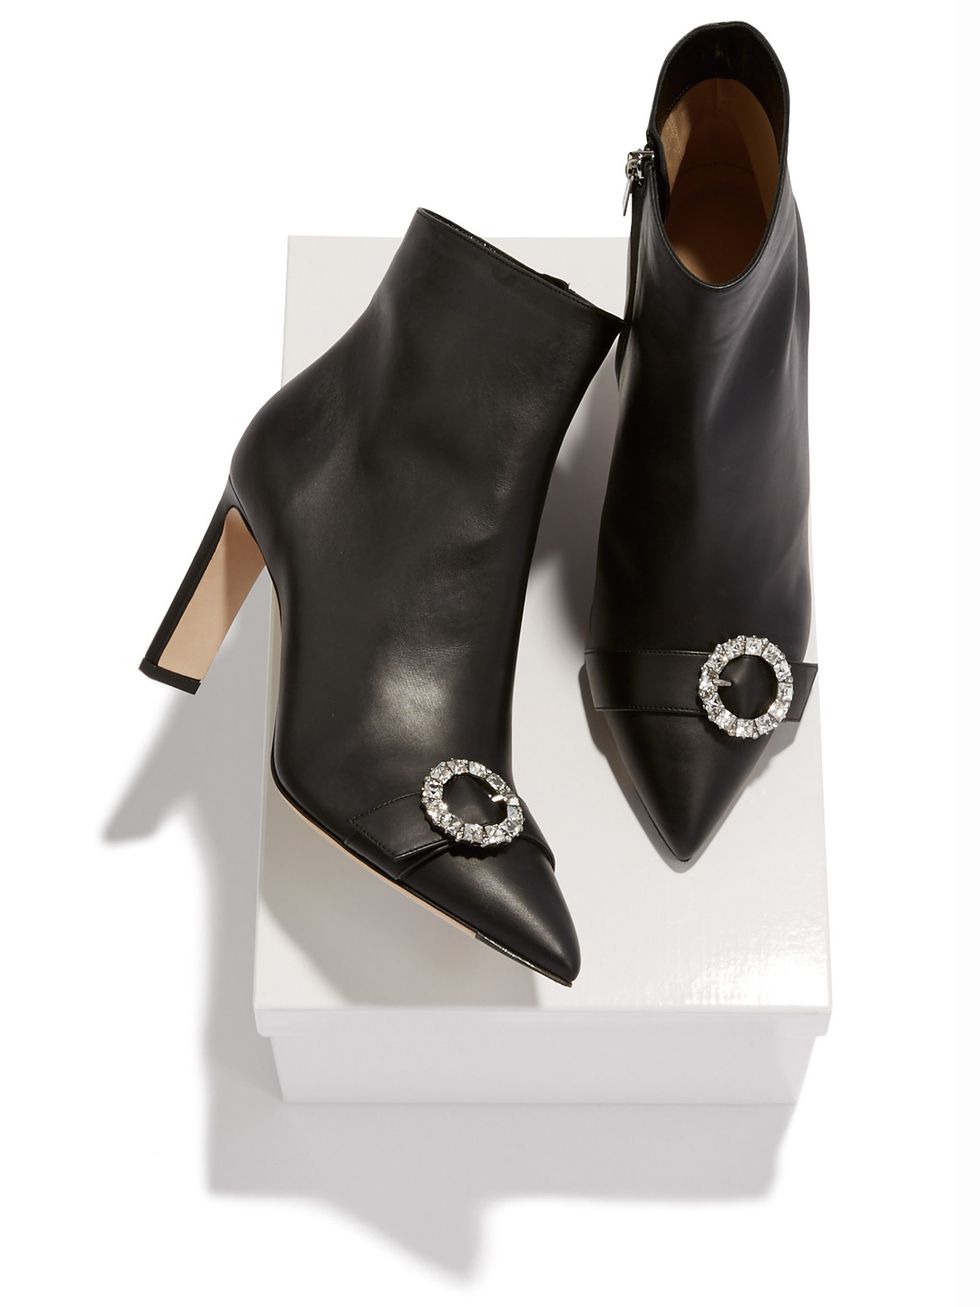 Boot, Black, Earrings, Leather, Synthetic rubber, Dress shoe, Silver, Fashion design, 